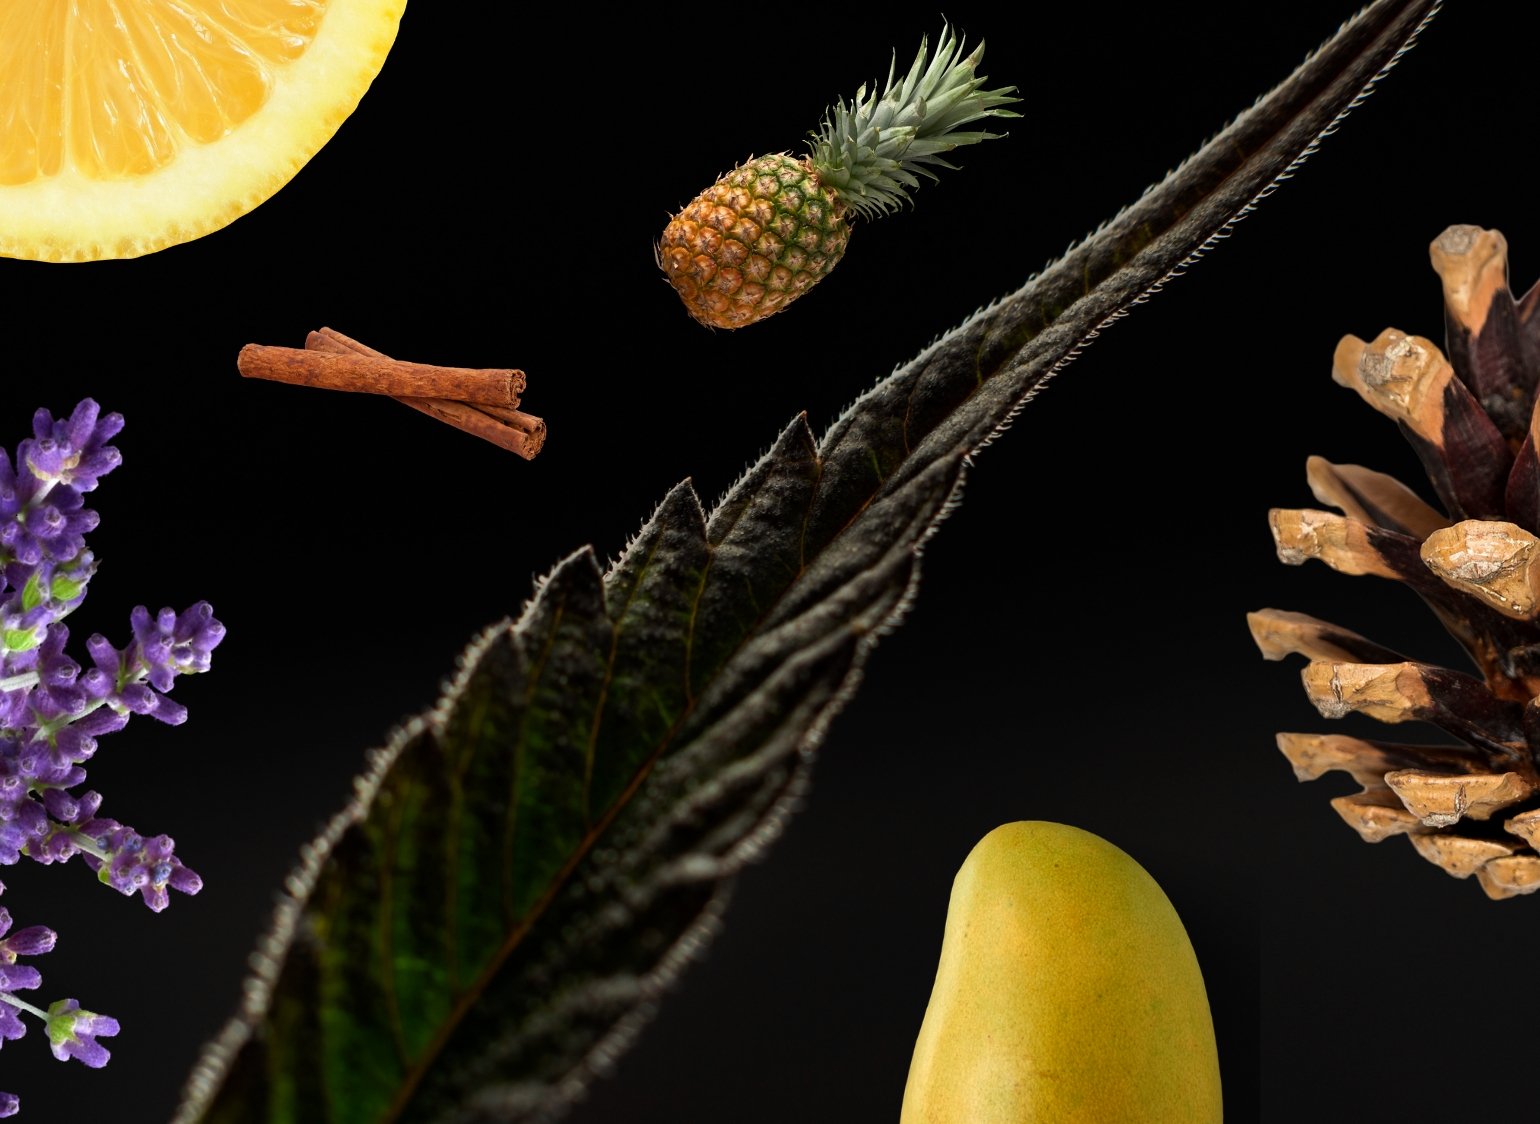 Dive into the world of terpenes with our comprehensive guide. Learn about these aromatic compounds found in cannabis and other plants, and how they contribute to the plant's distinctive aroma, flavor, and effects.